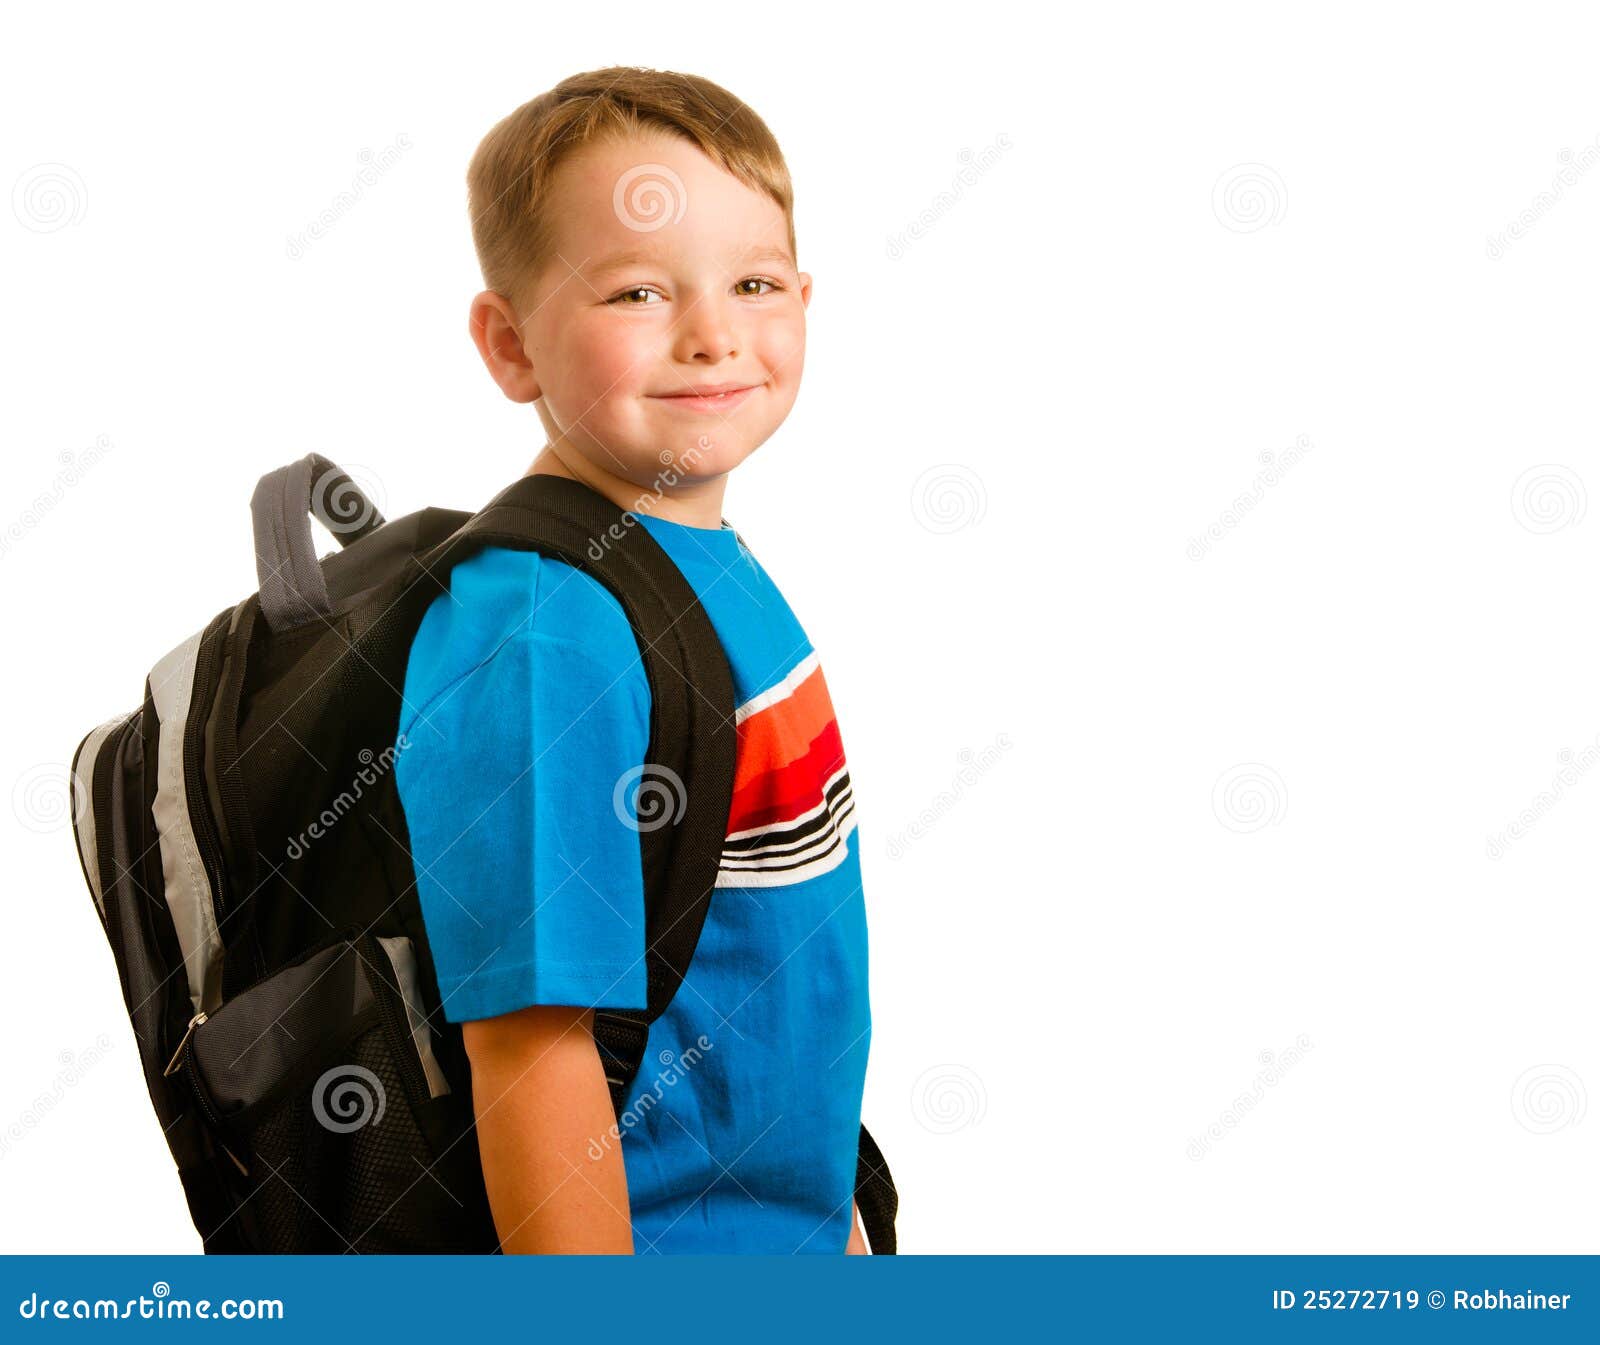 child wearing backpack  on white